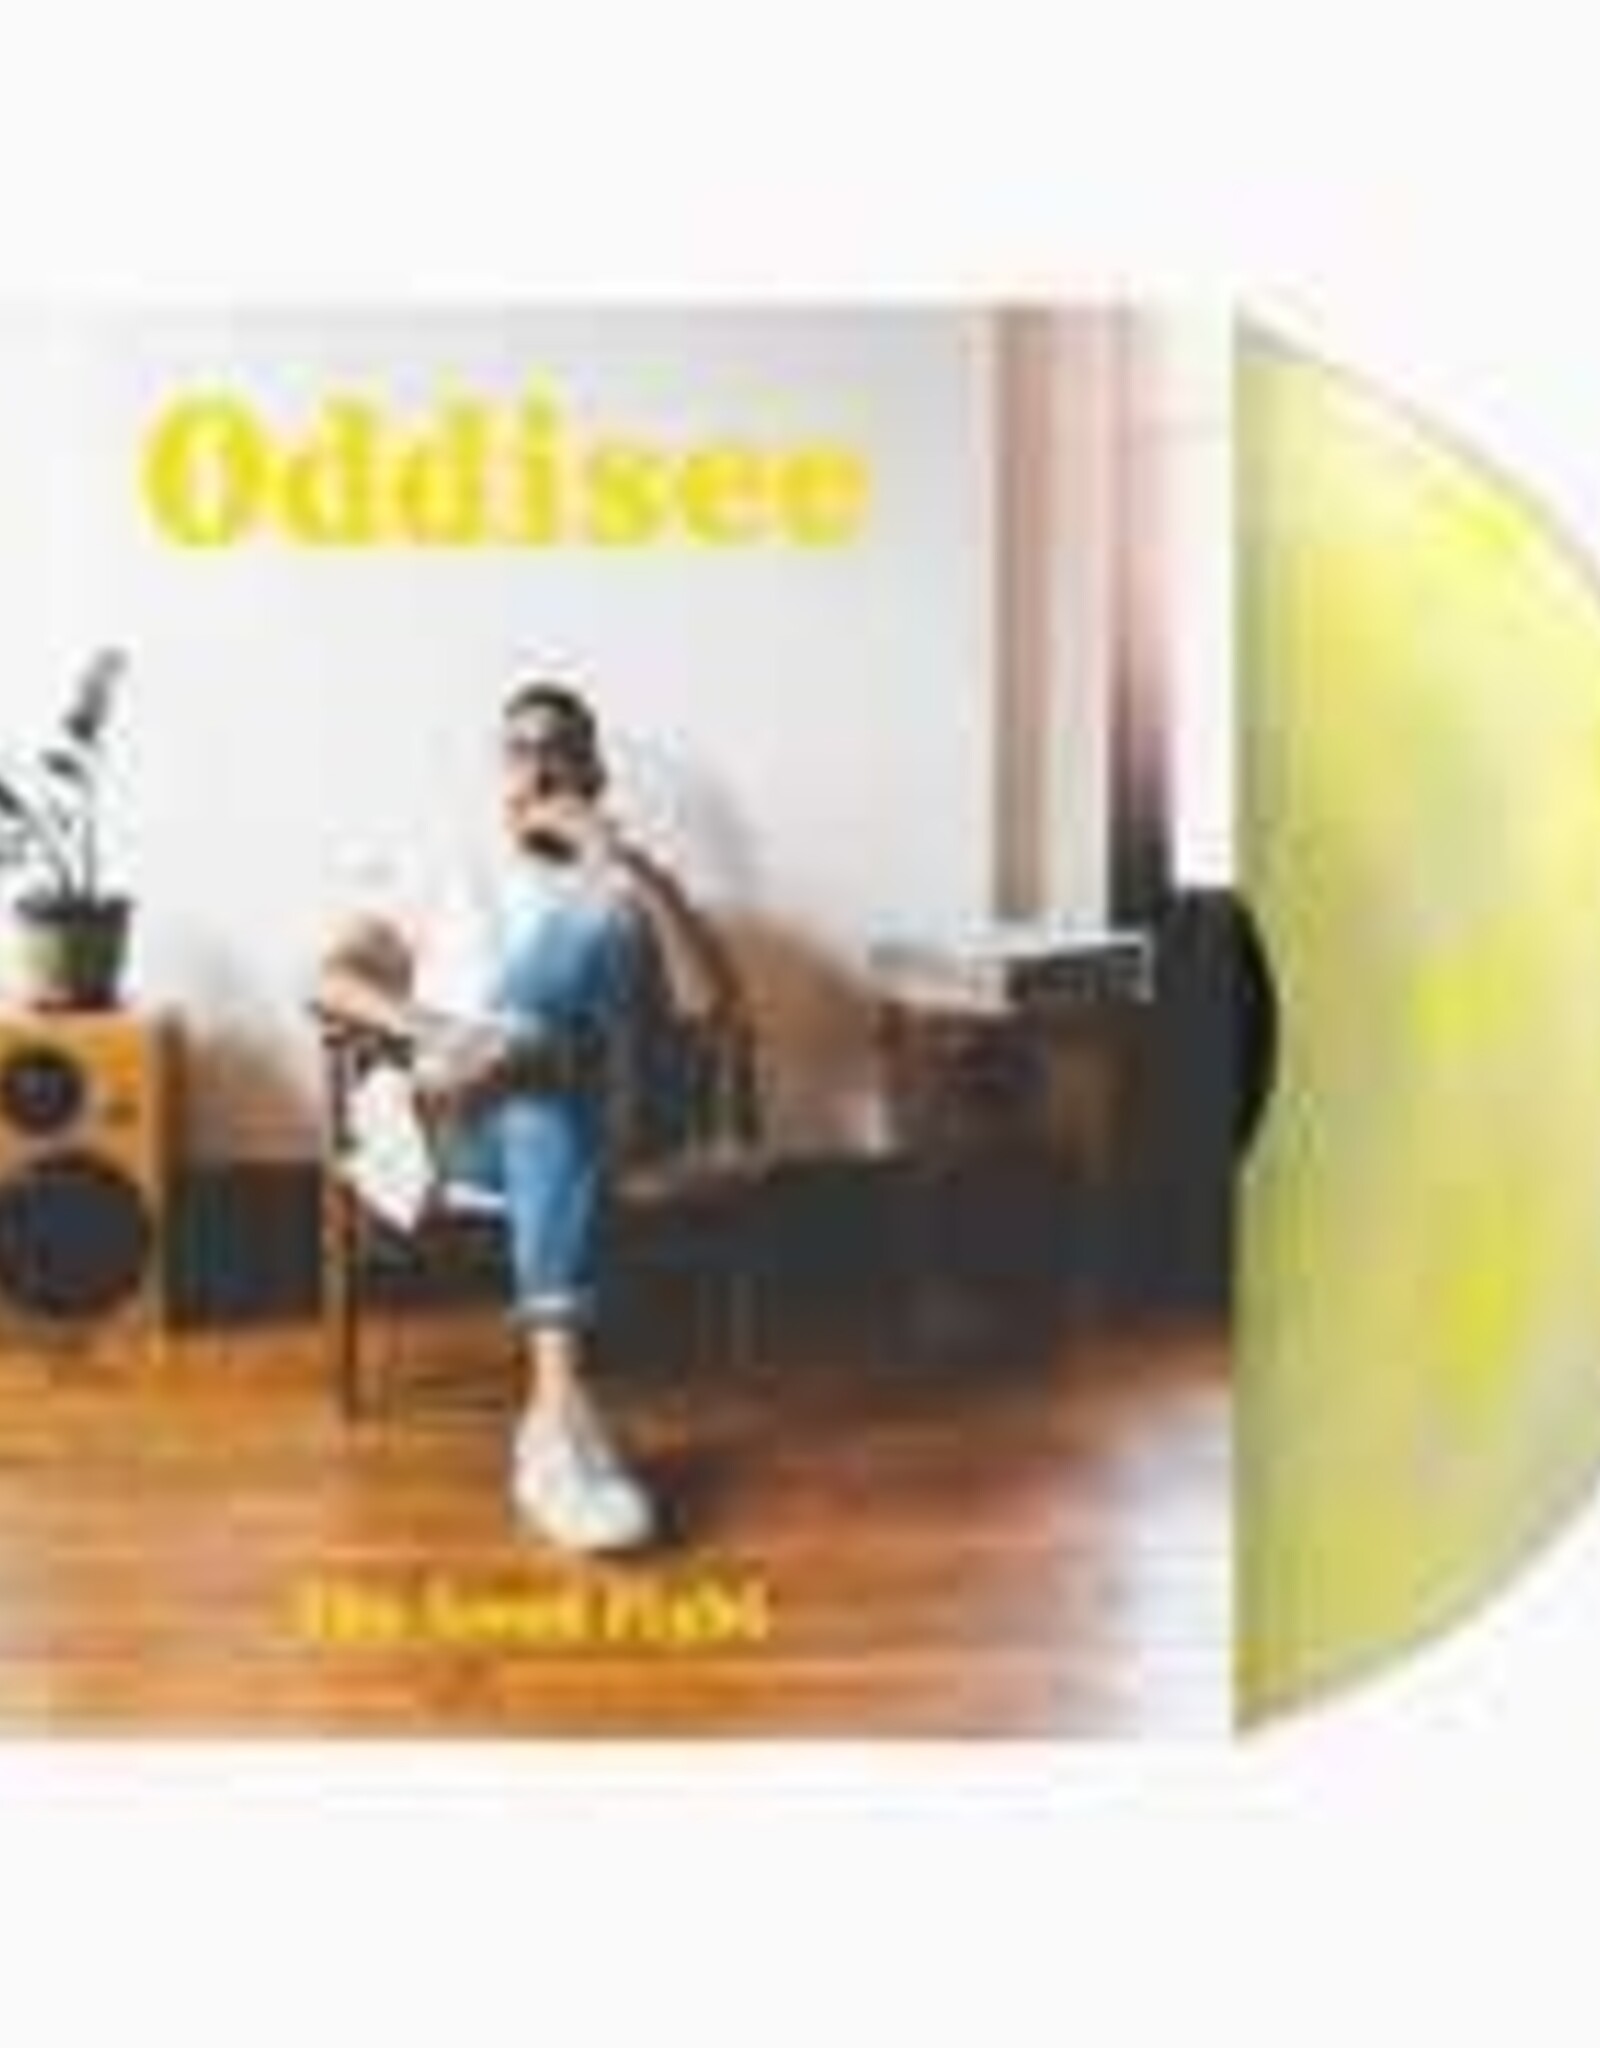 Oddisee - The Good Fight (indie exclusive YELLOW DROP VINYL)